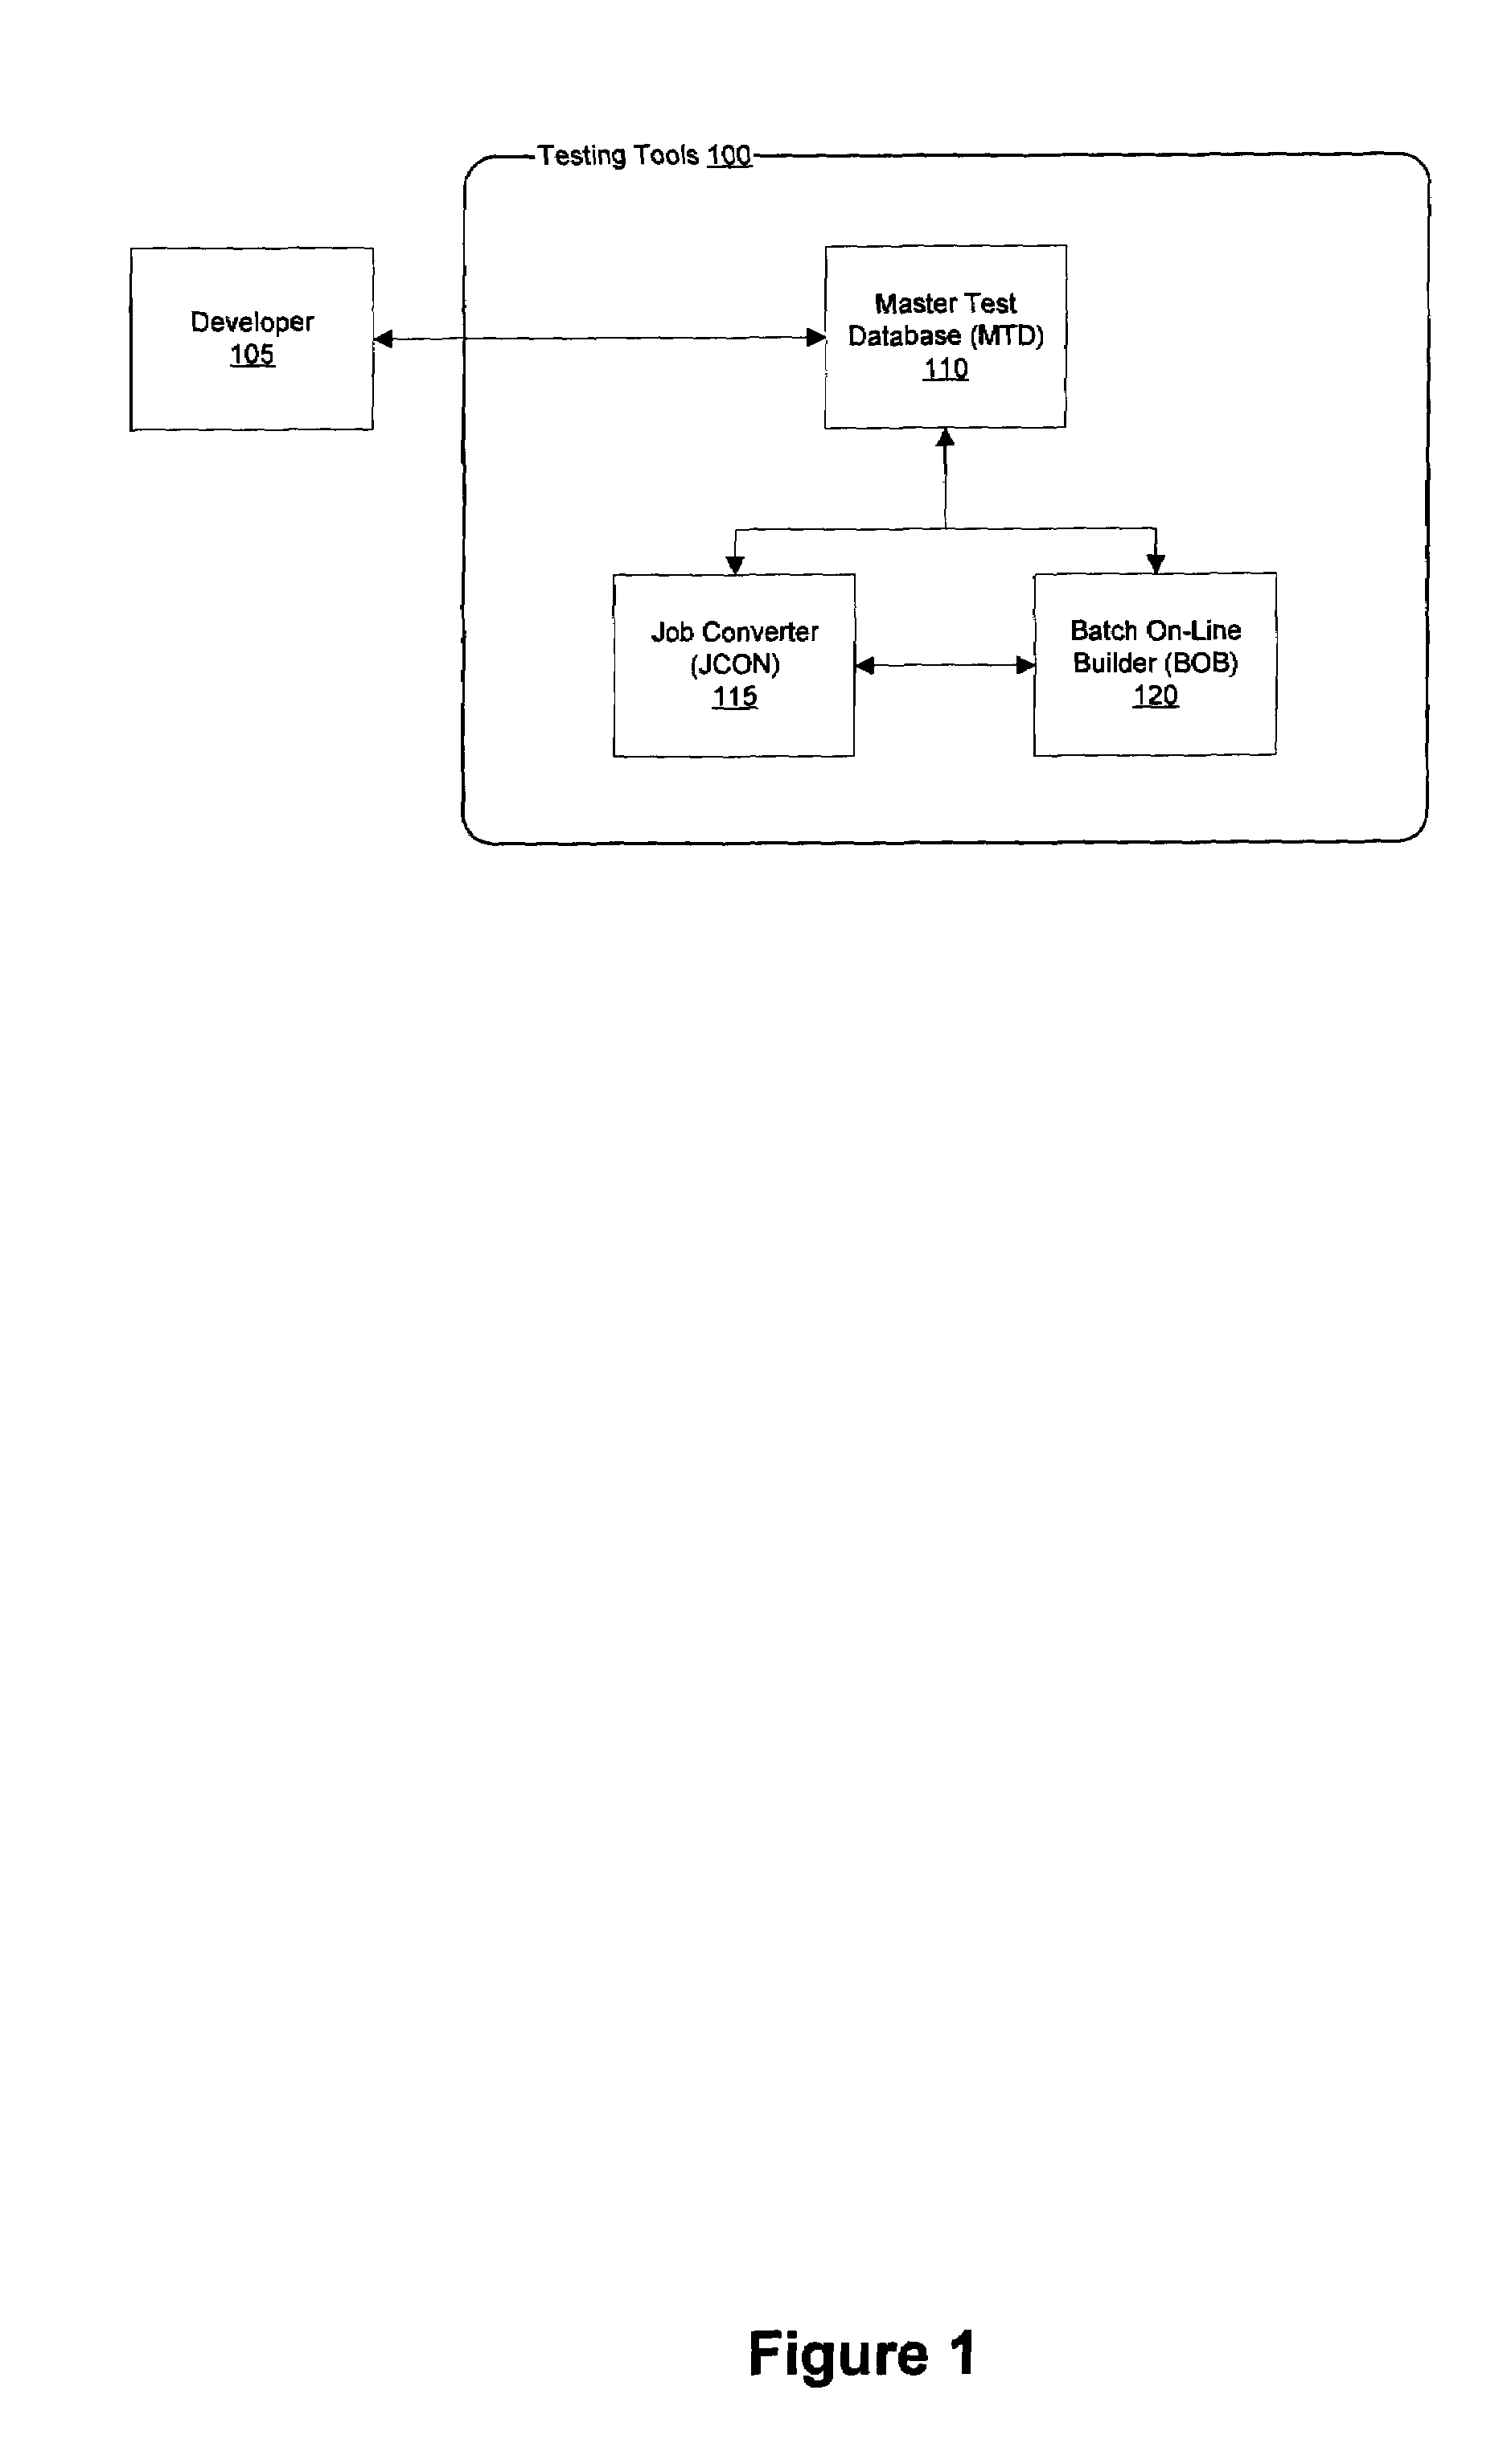 System and method for building full batch test environments